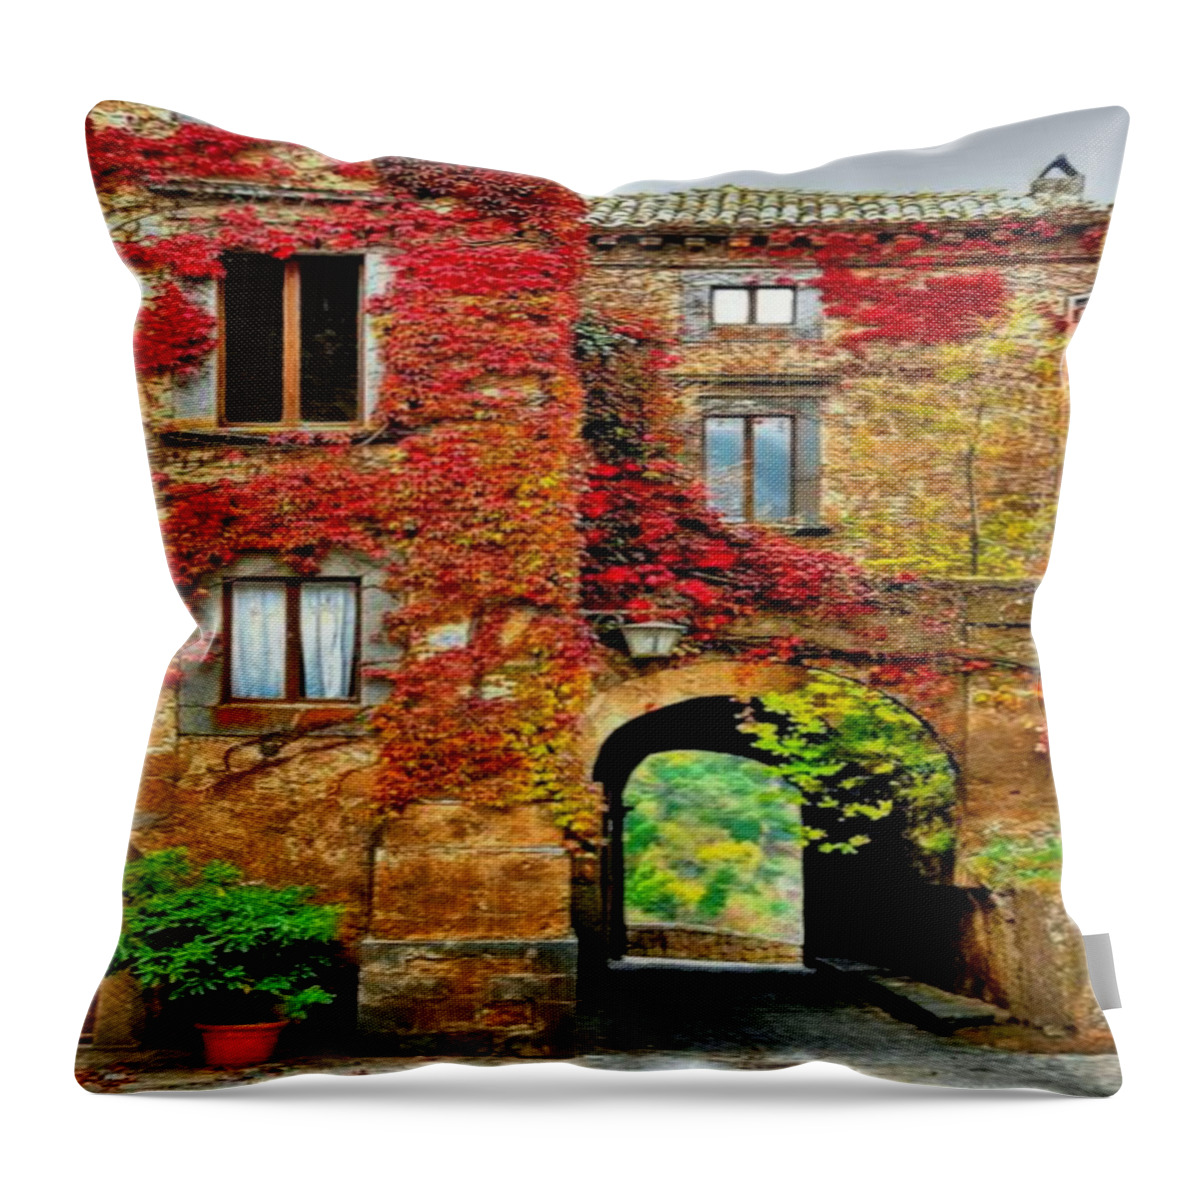  Throw Pillow featuring the photograph Bagnoregio Italy by Digital Art Cafe